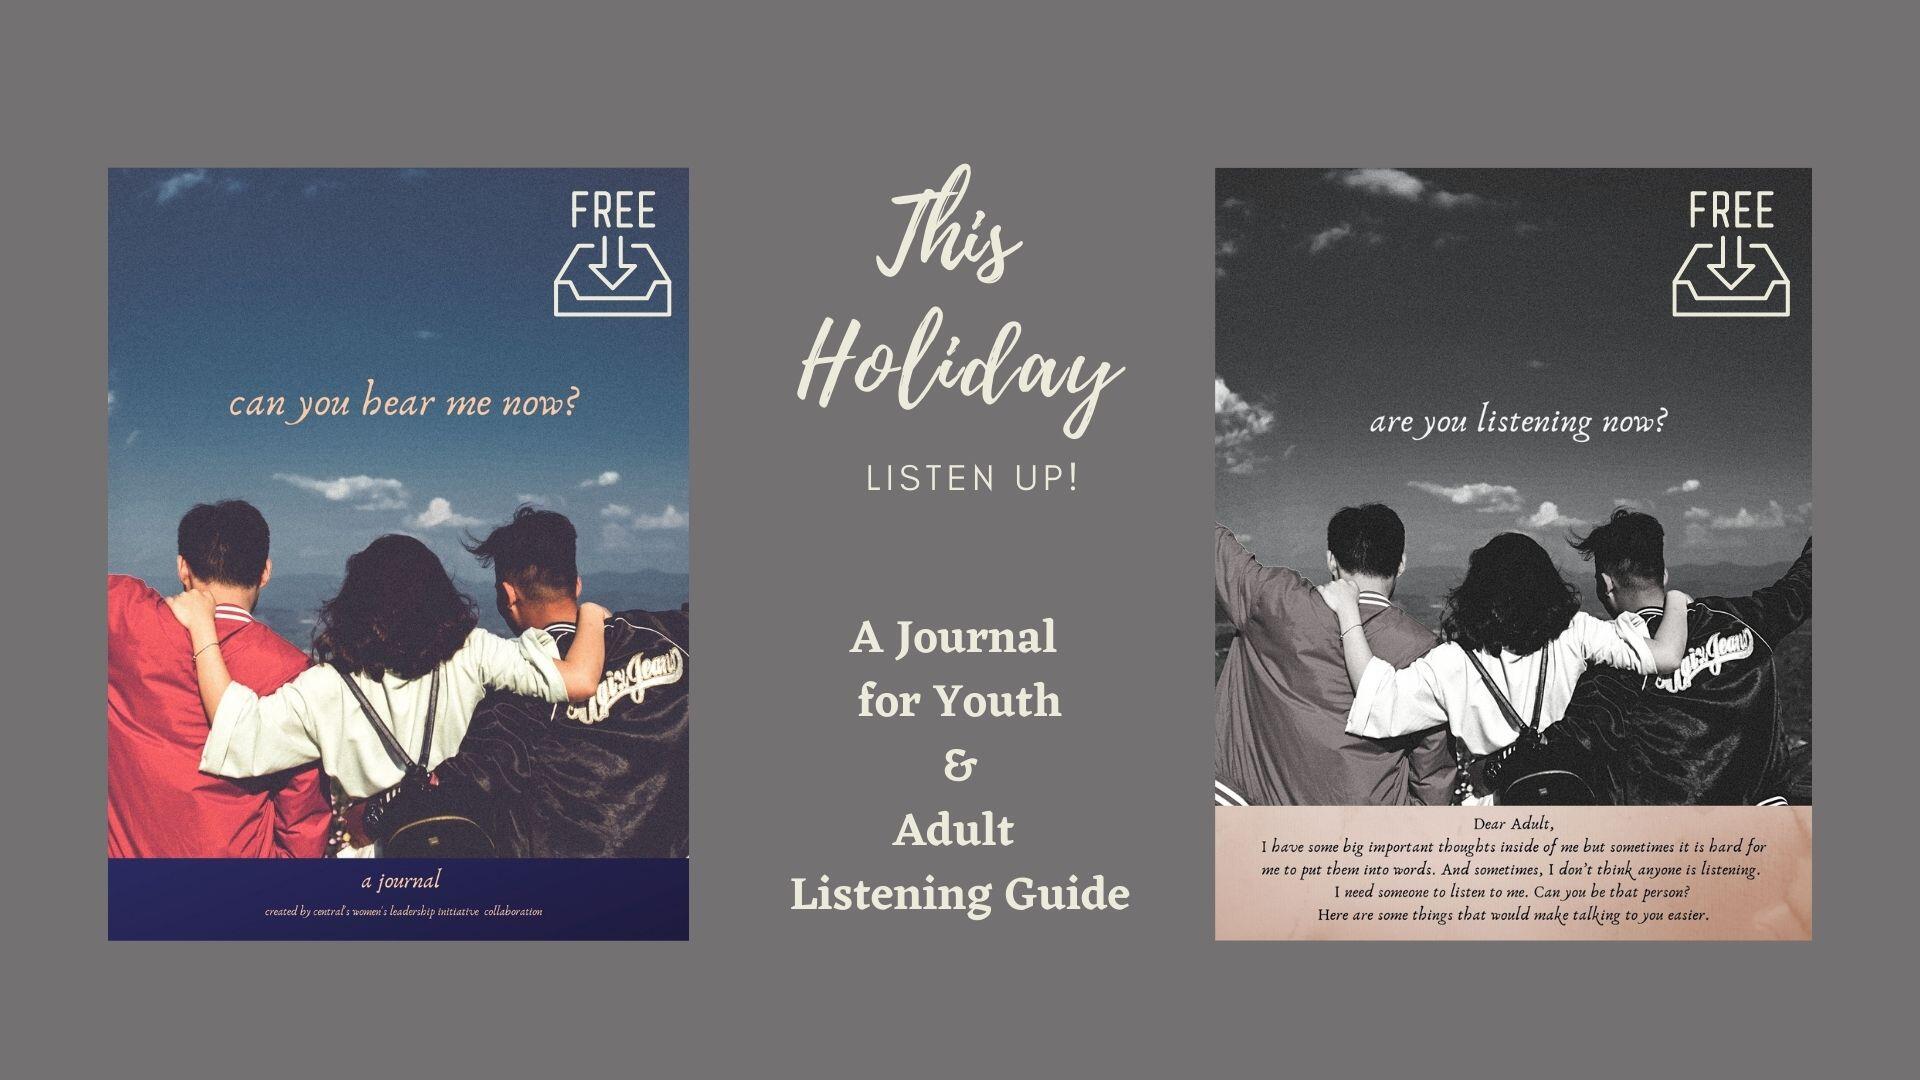 How to Survive the Holidays? Listen!